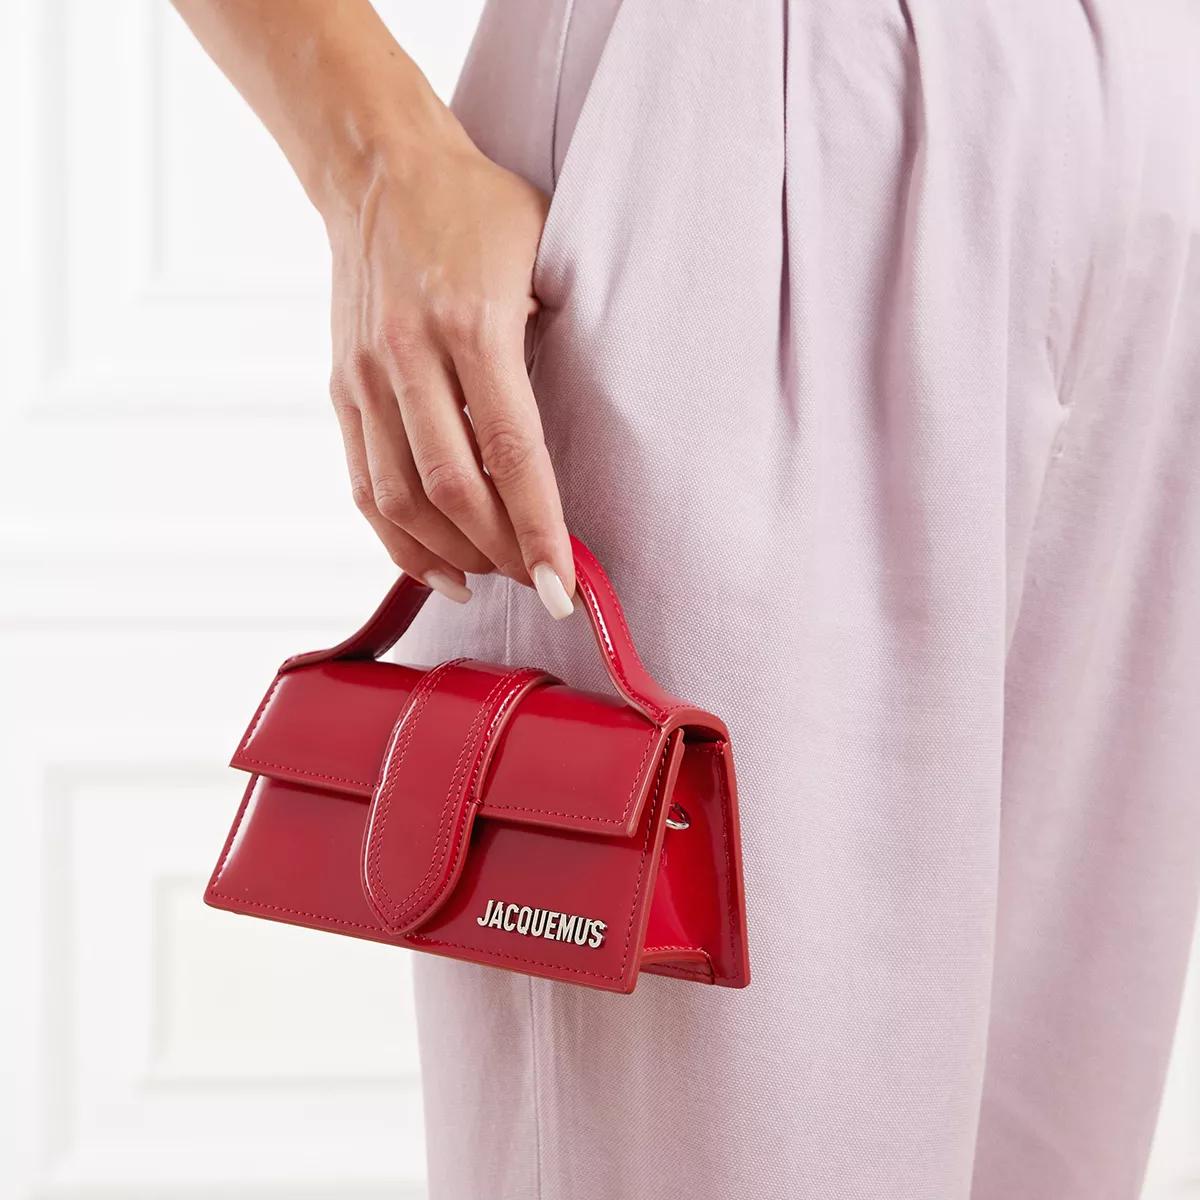 Jacquemus Crossbody bags Le Bambino Shoulder Bag in rood